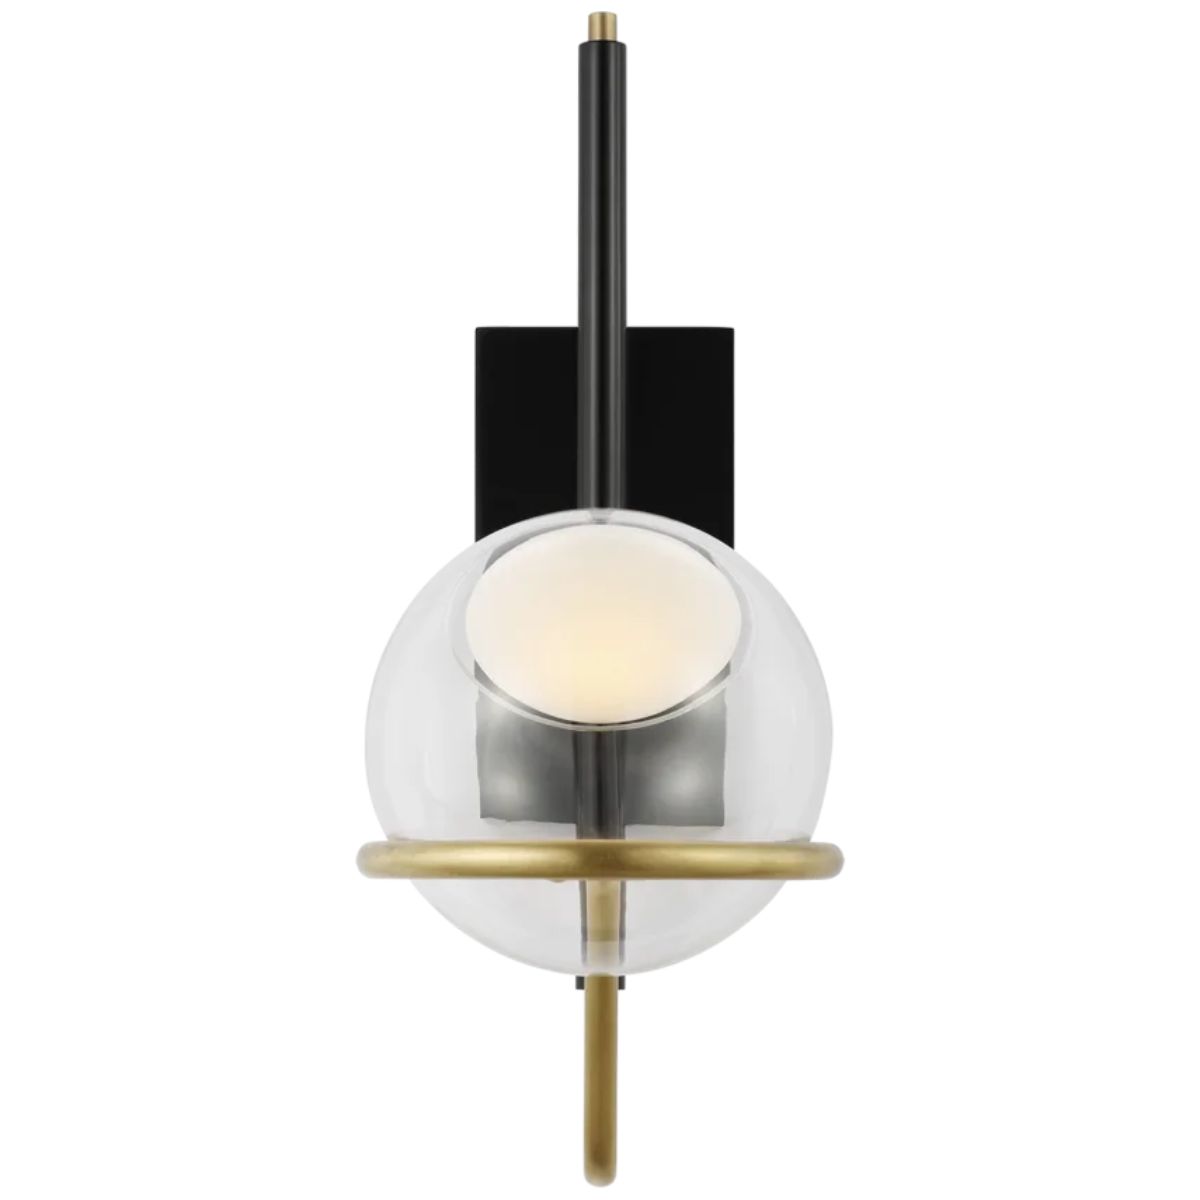 Crosby 18 in. LED Wall Sconce 120V Black & Natural Brass finish